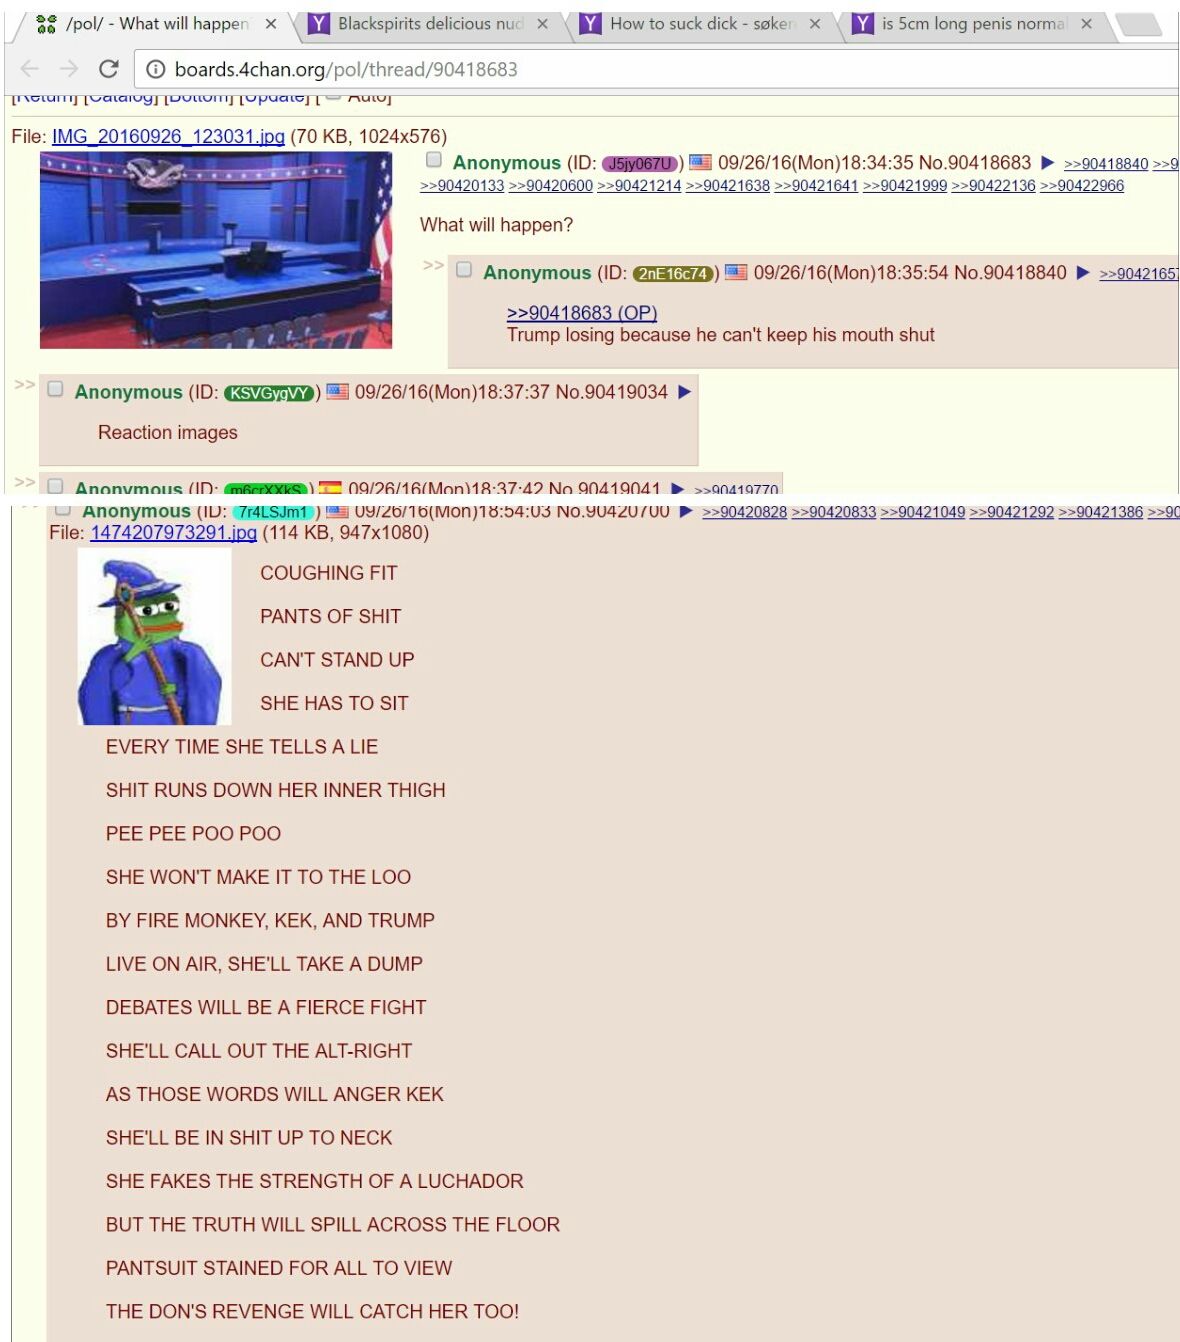 /pol/itican is optimistic about the clump debate